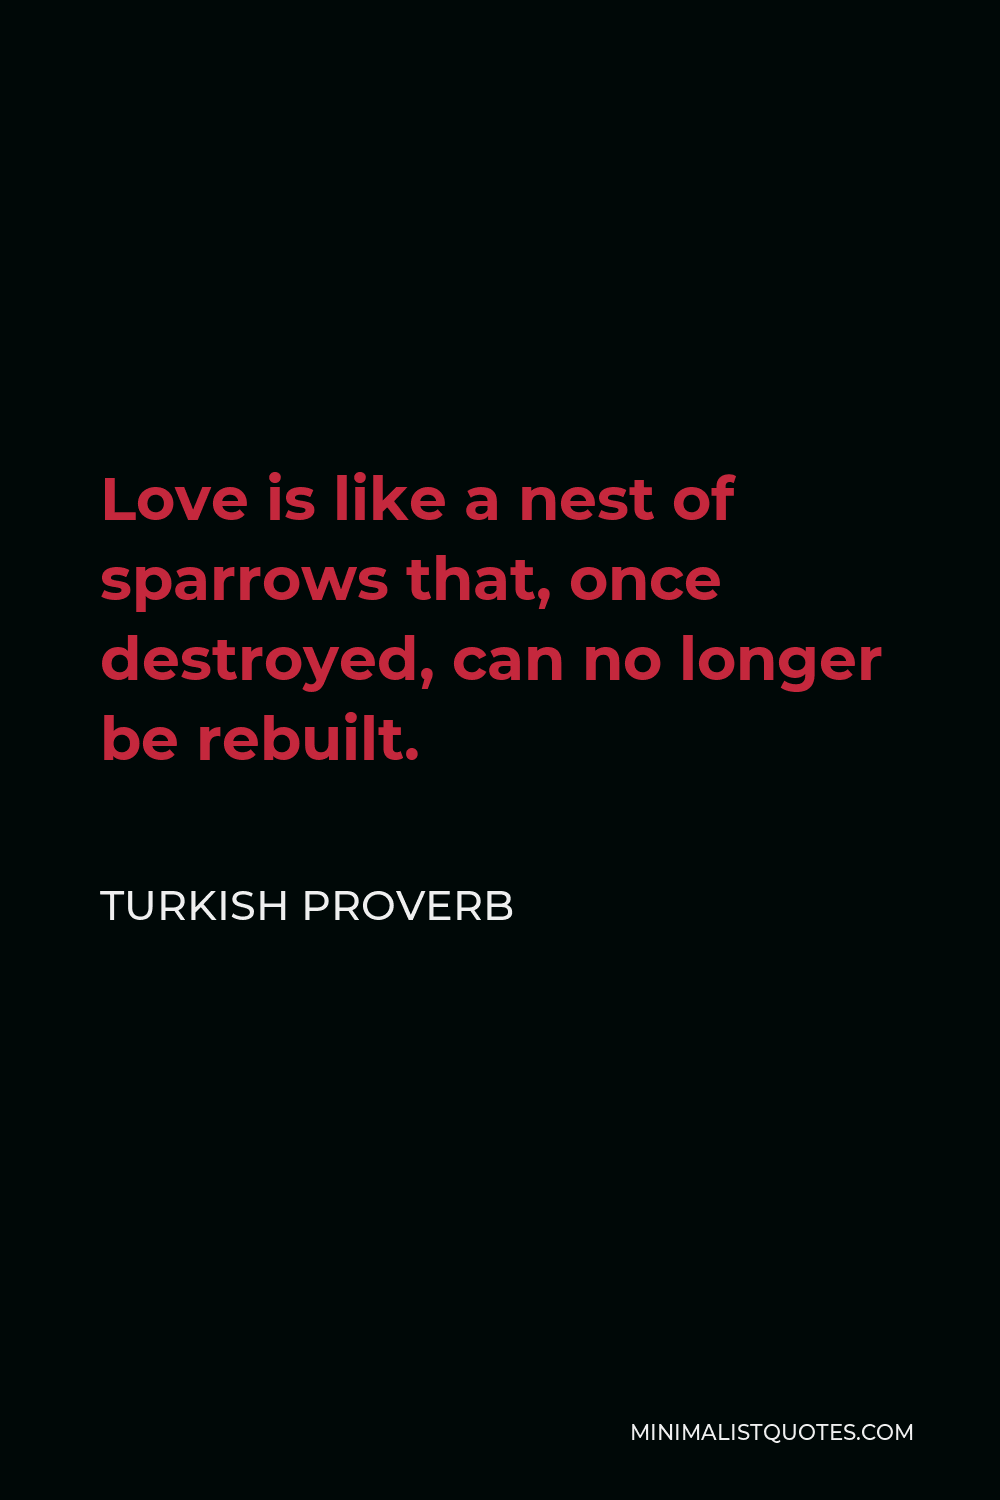 Turkish Proverb Quote - Love is like a nest of sparrows that, once destroyed, can no longer be rebuilt